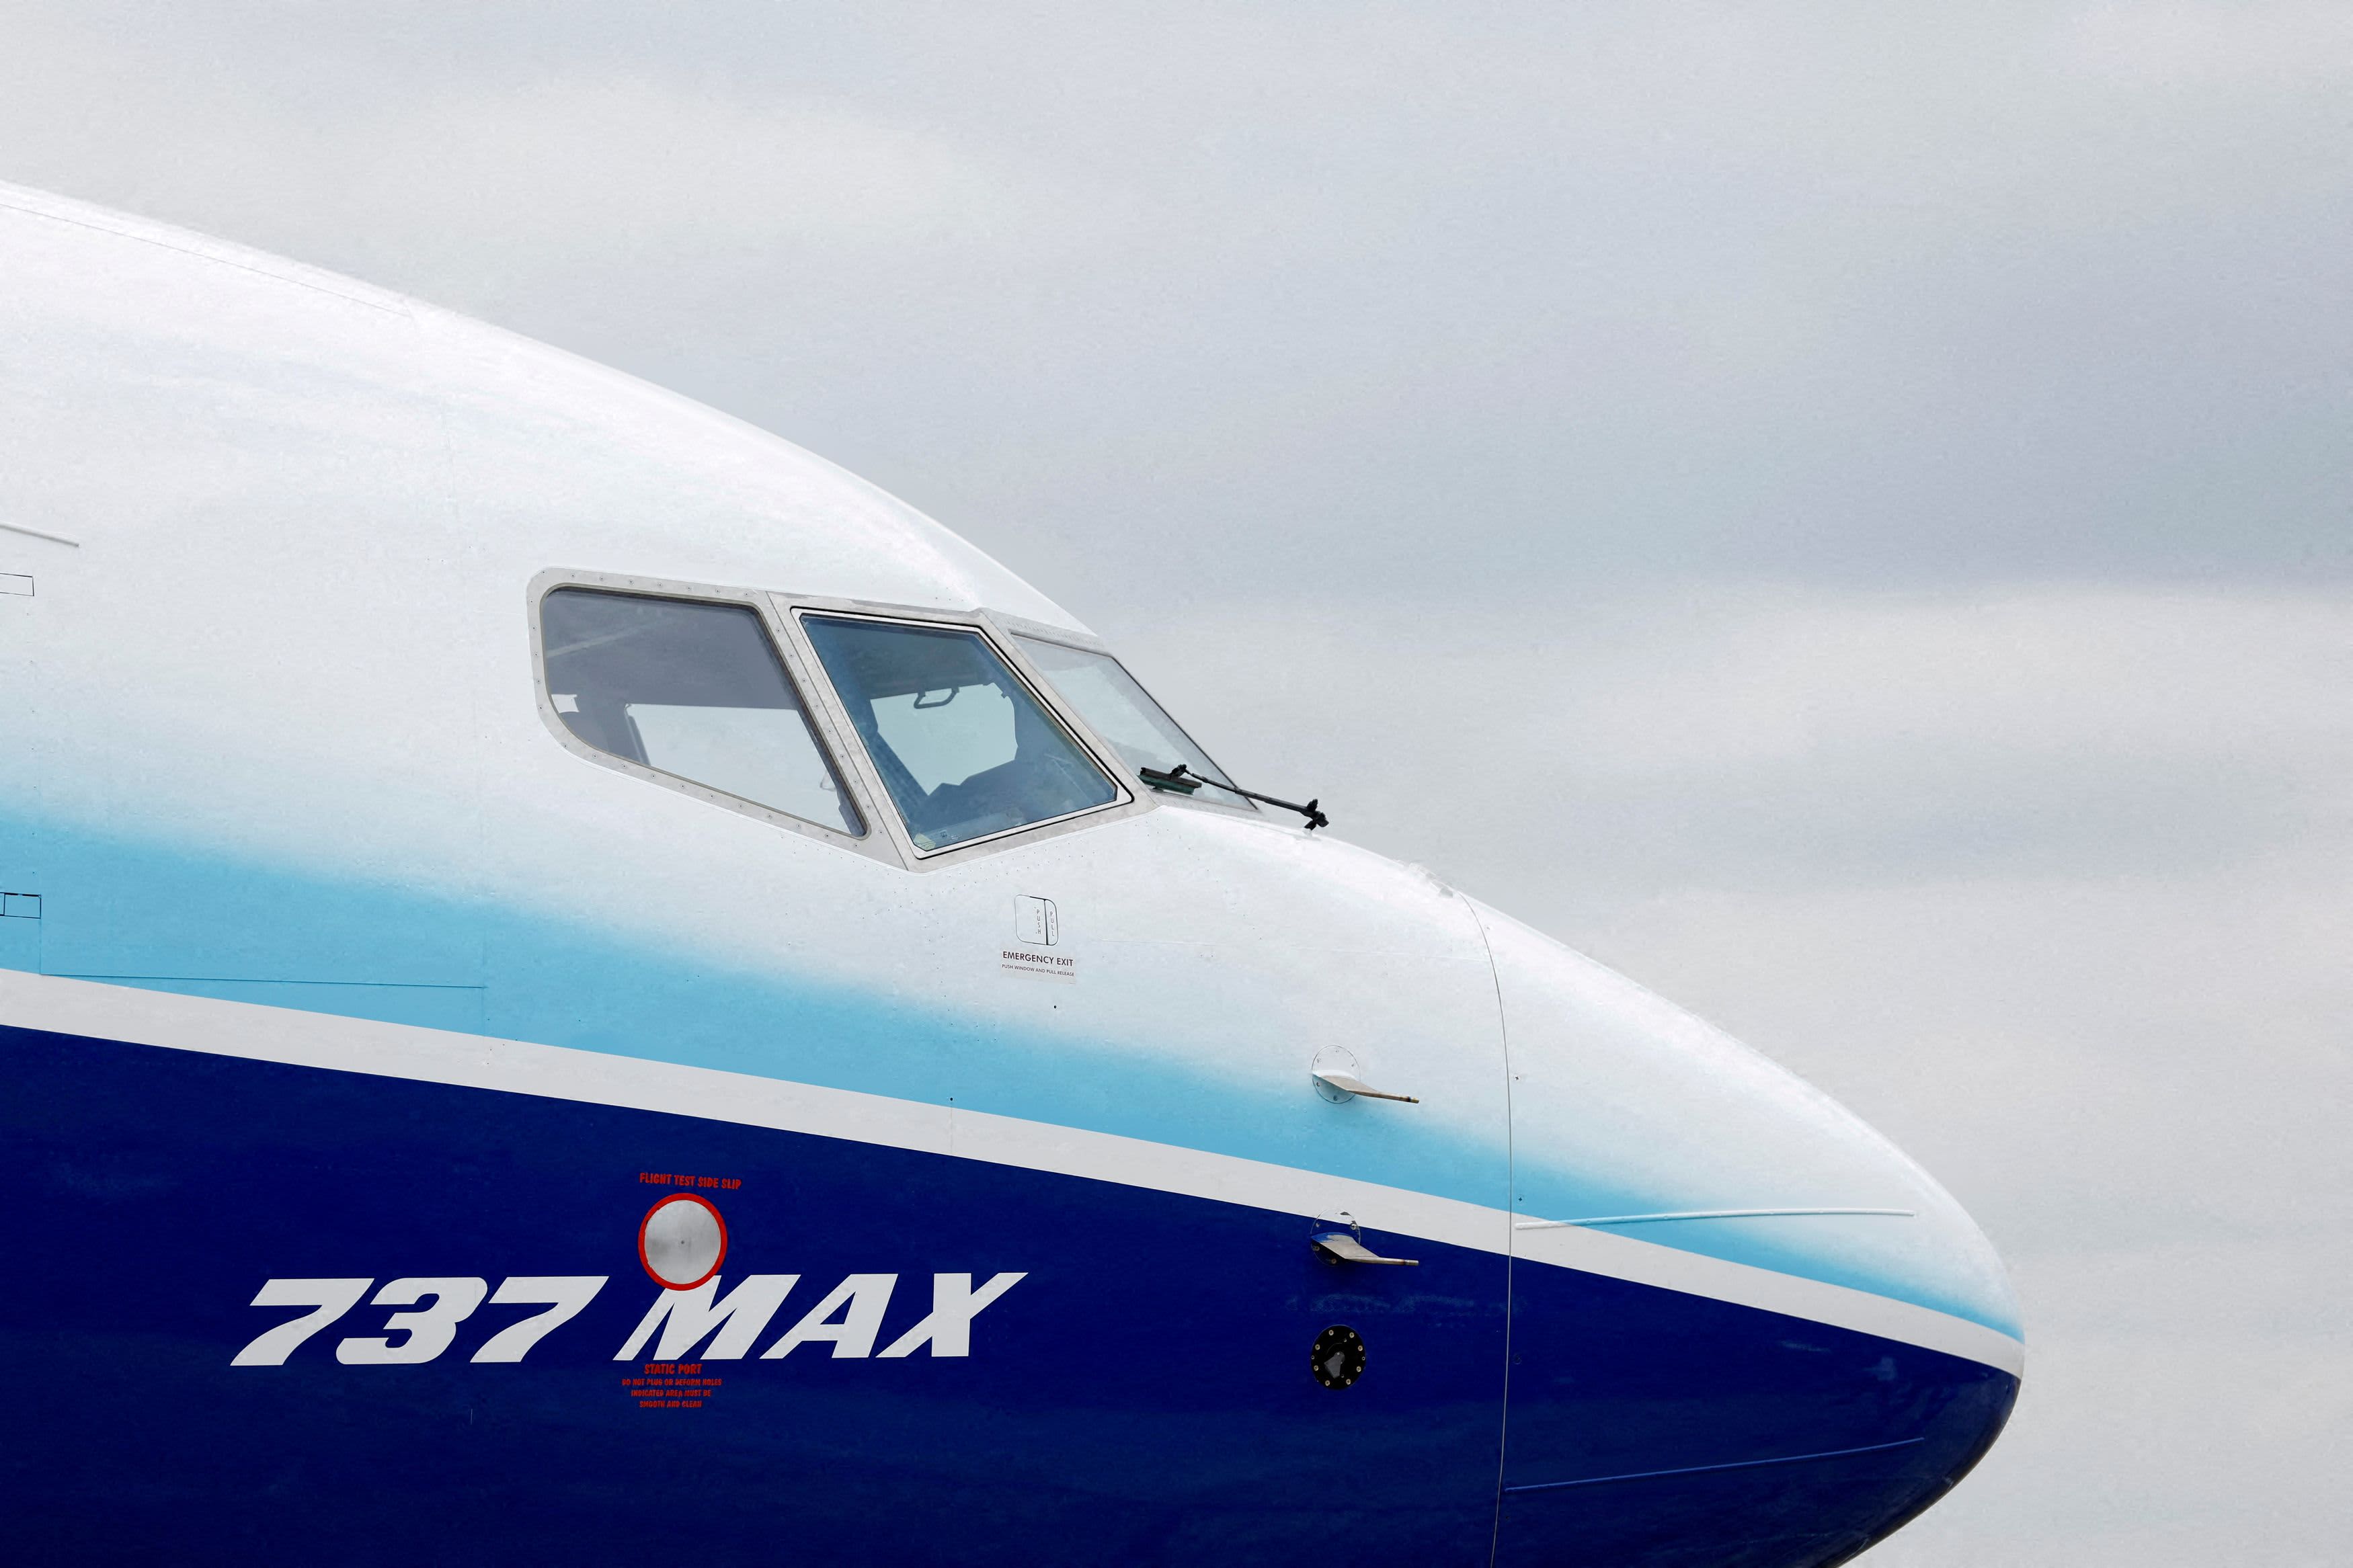 Boeing urges inspection of 737 MAX planes for 'possible bolt looseness'